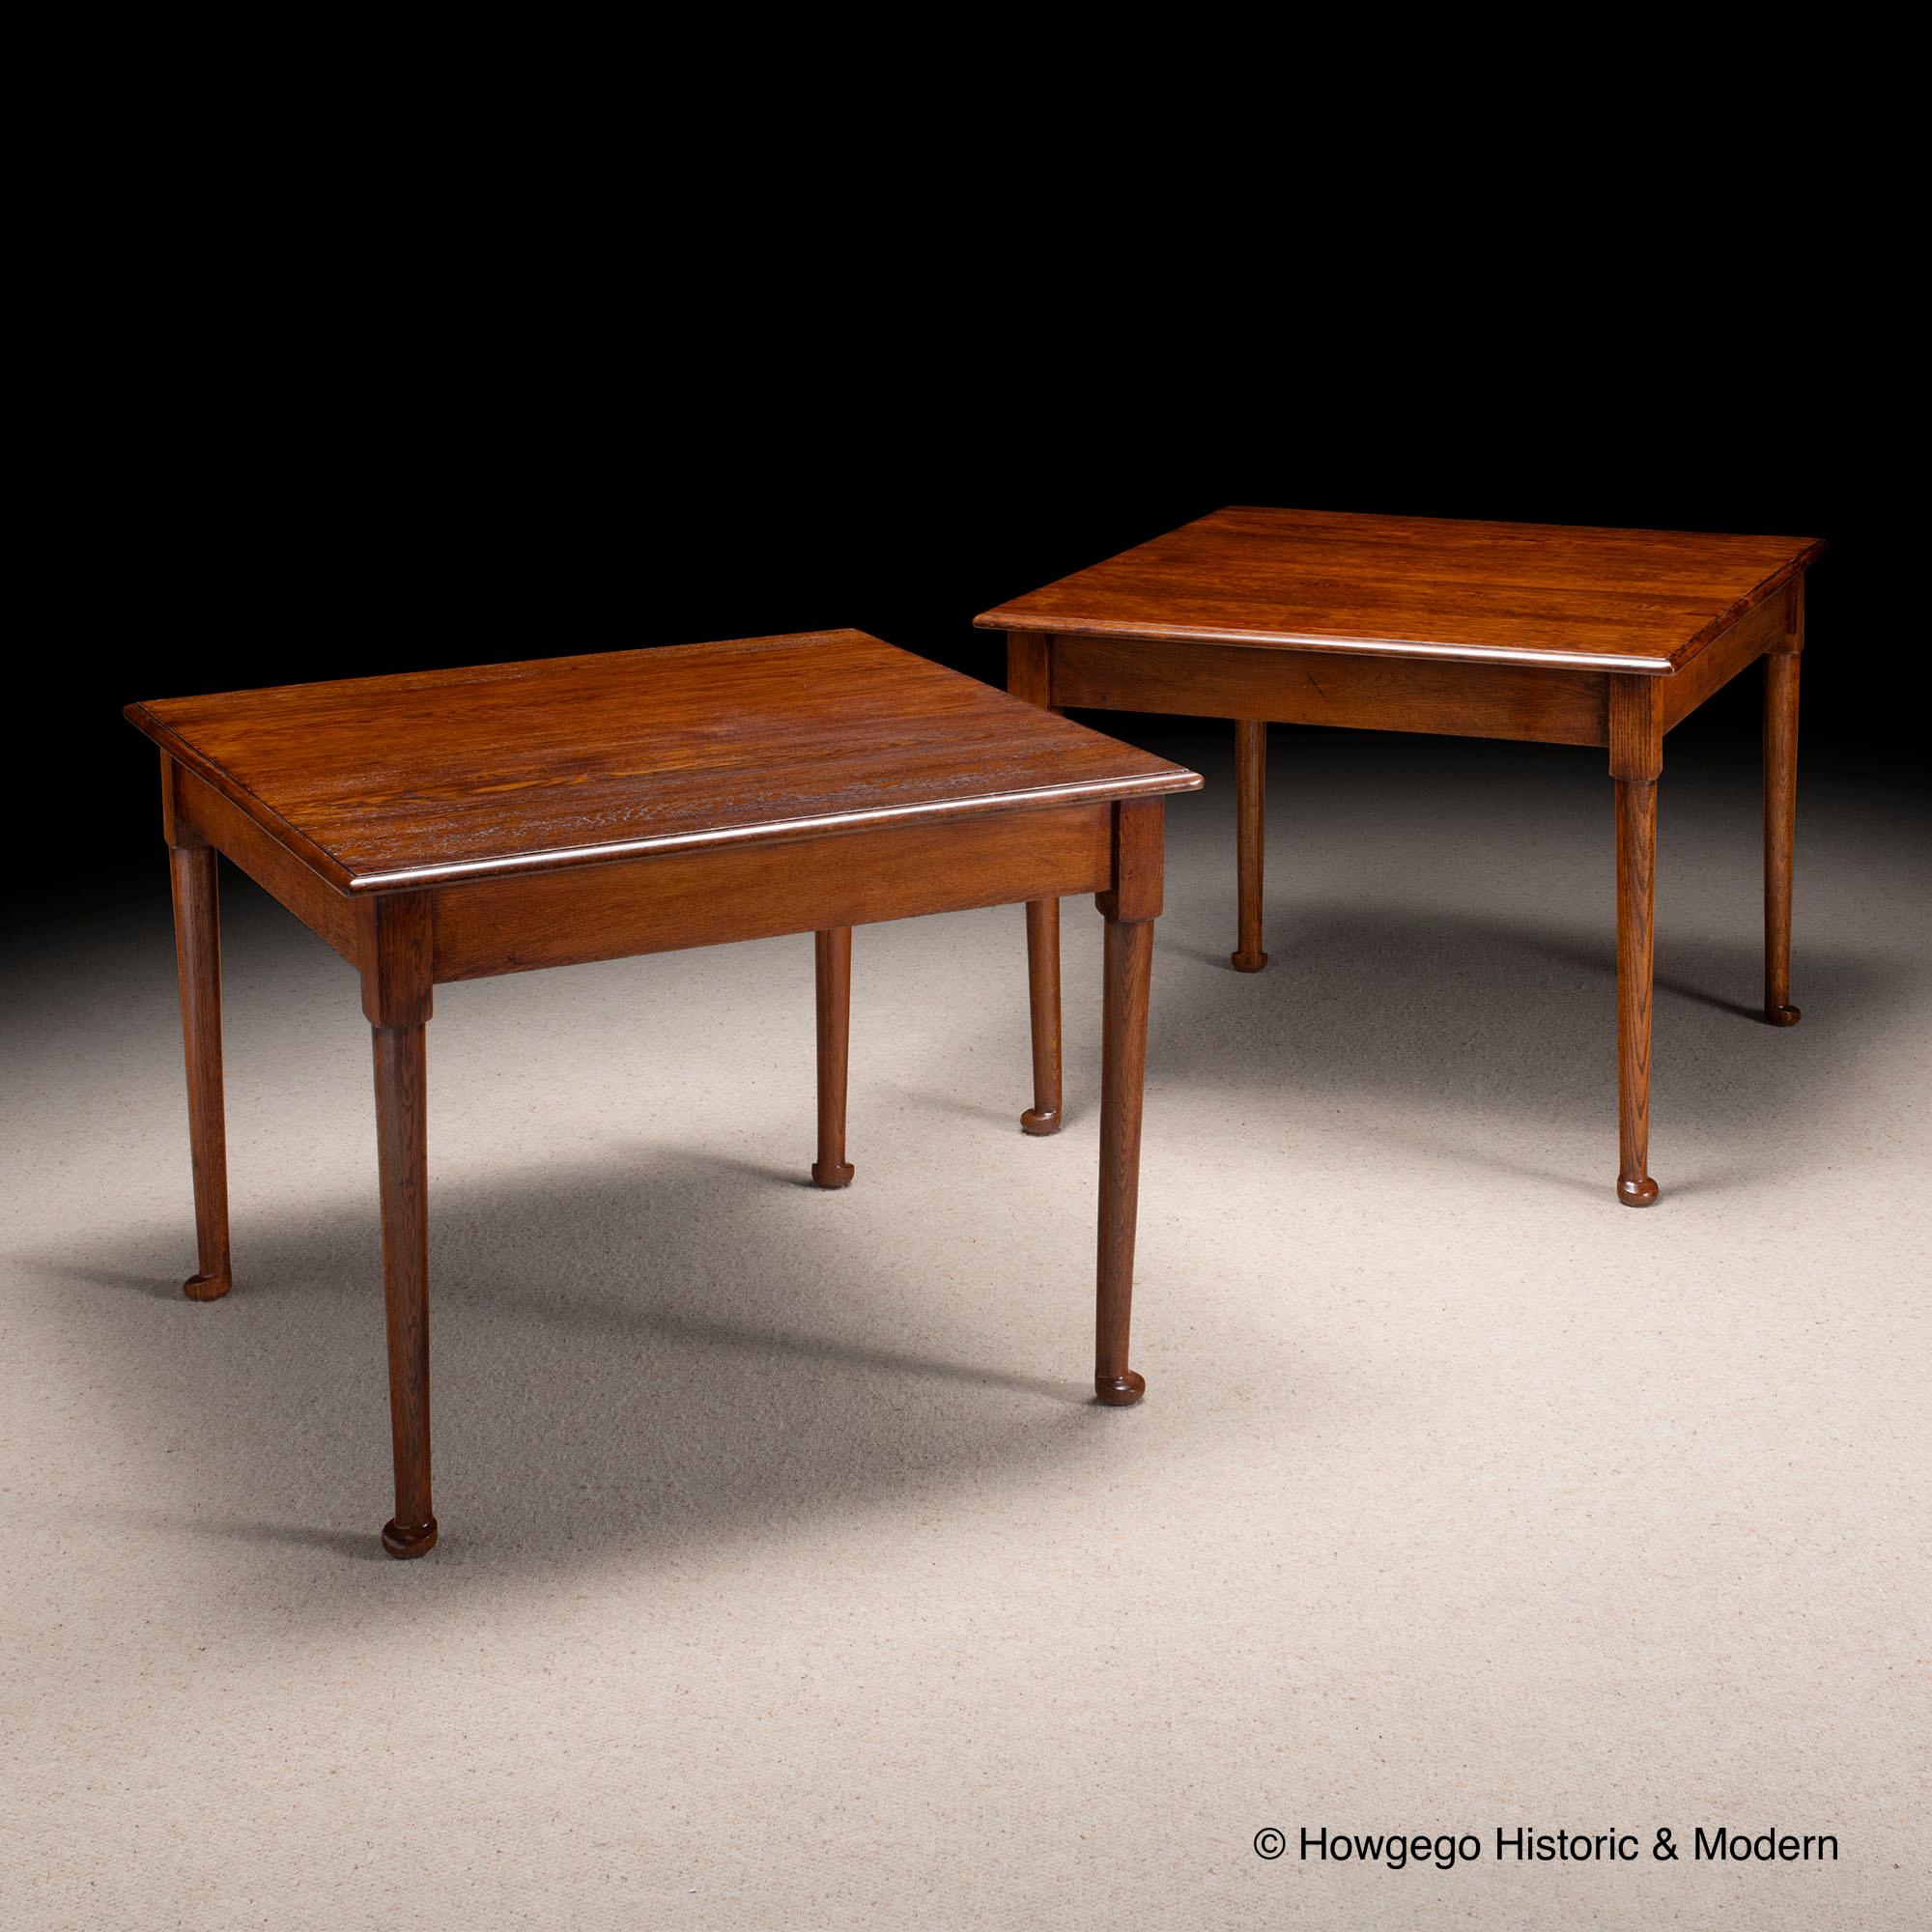 Rare to find a pair of elm tables of classical form this size
The simplicity of the classical form creates fluid lines and focusing the eye into the beauty of the elm grain
The carpenter has selected elm with beautiful figuring, a decorative feature